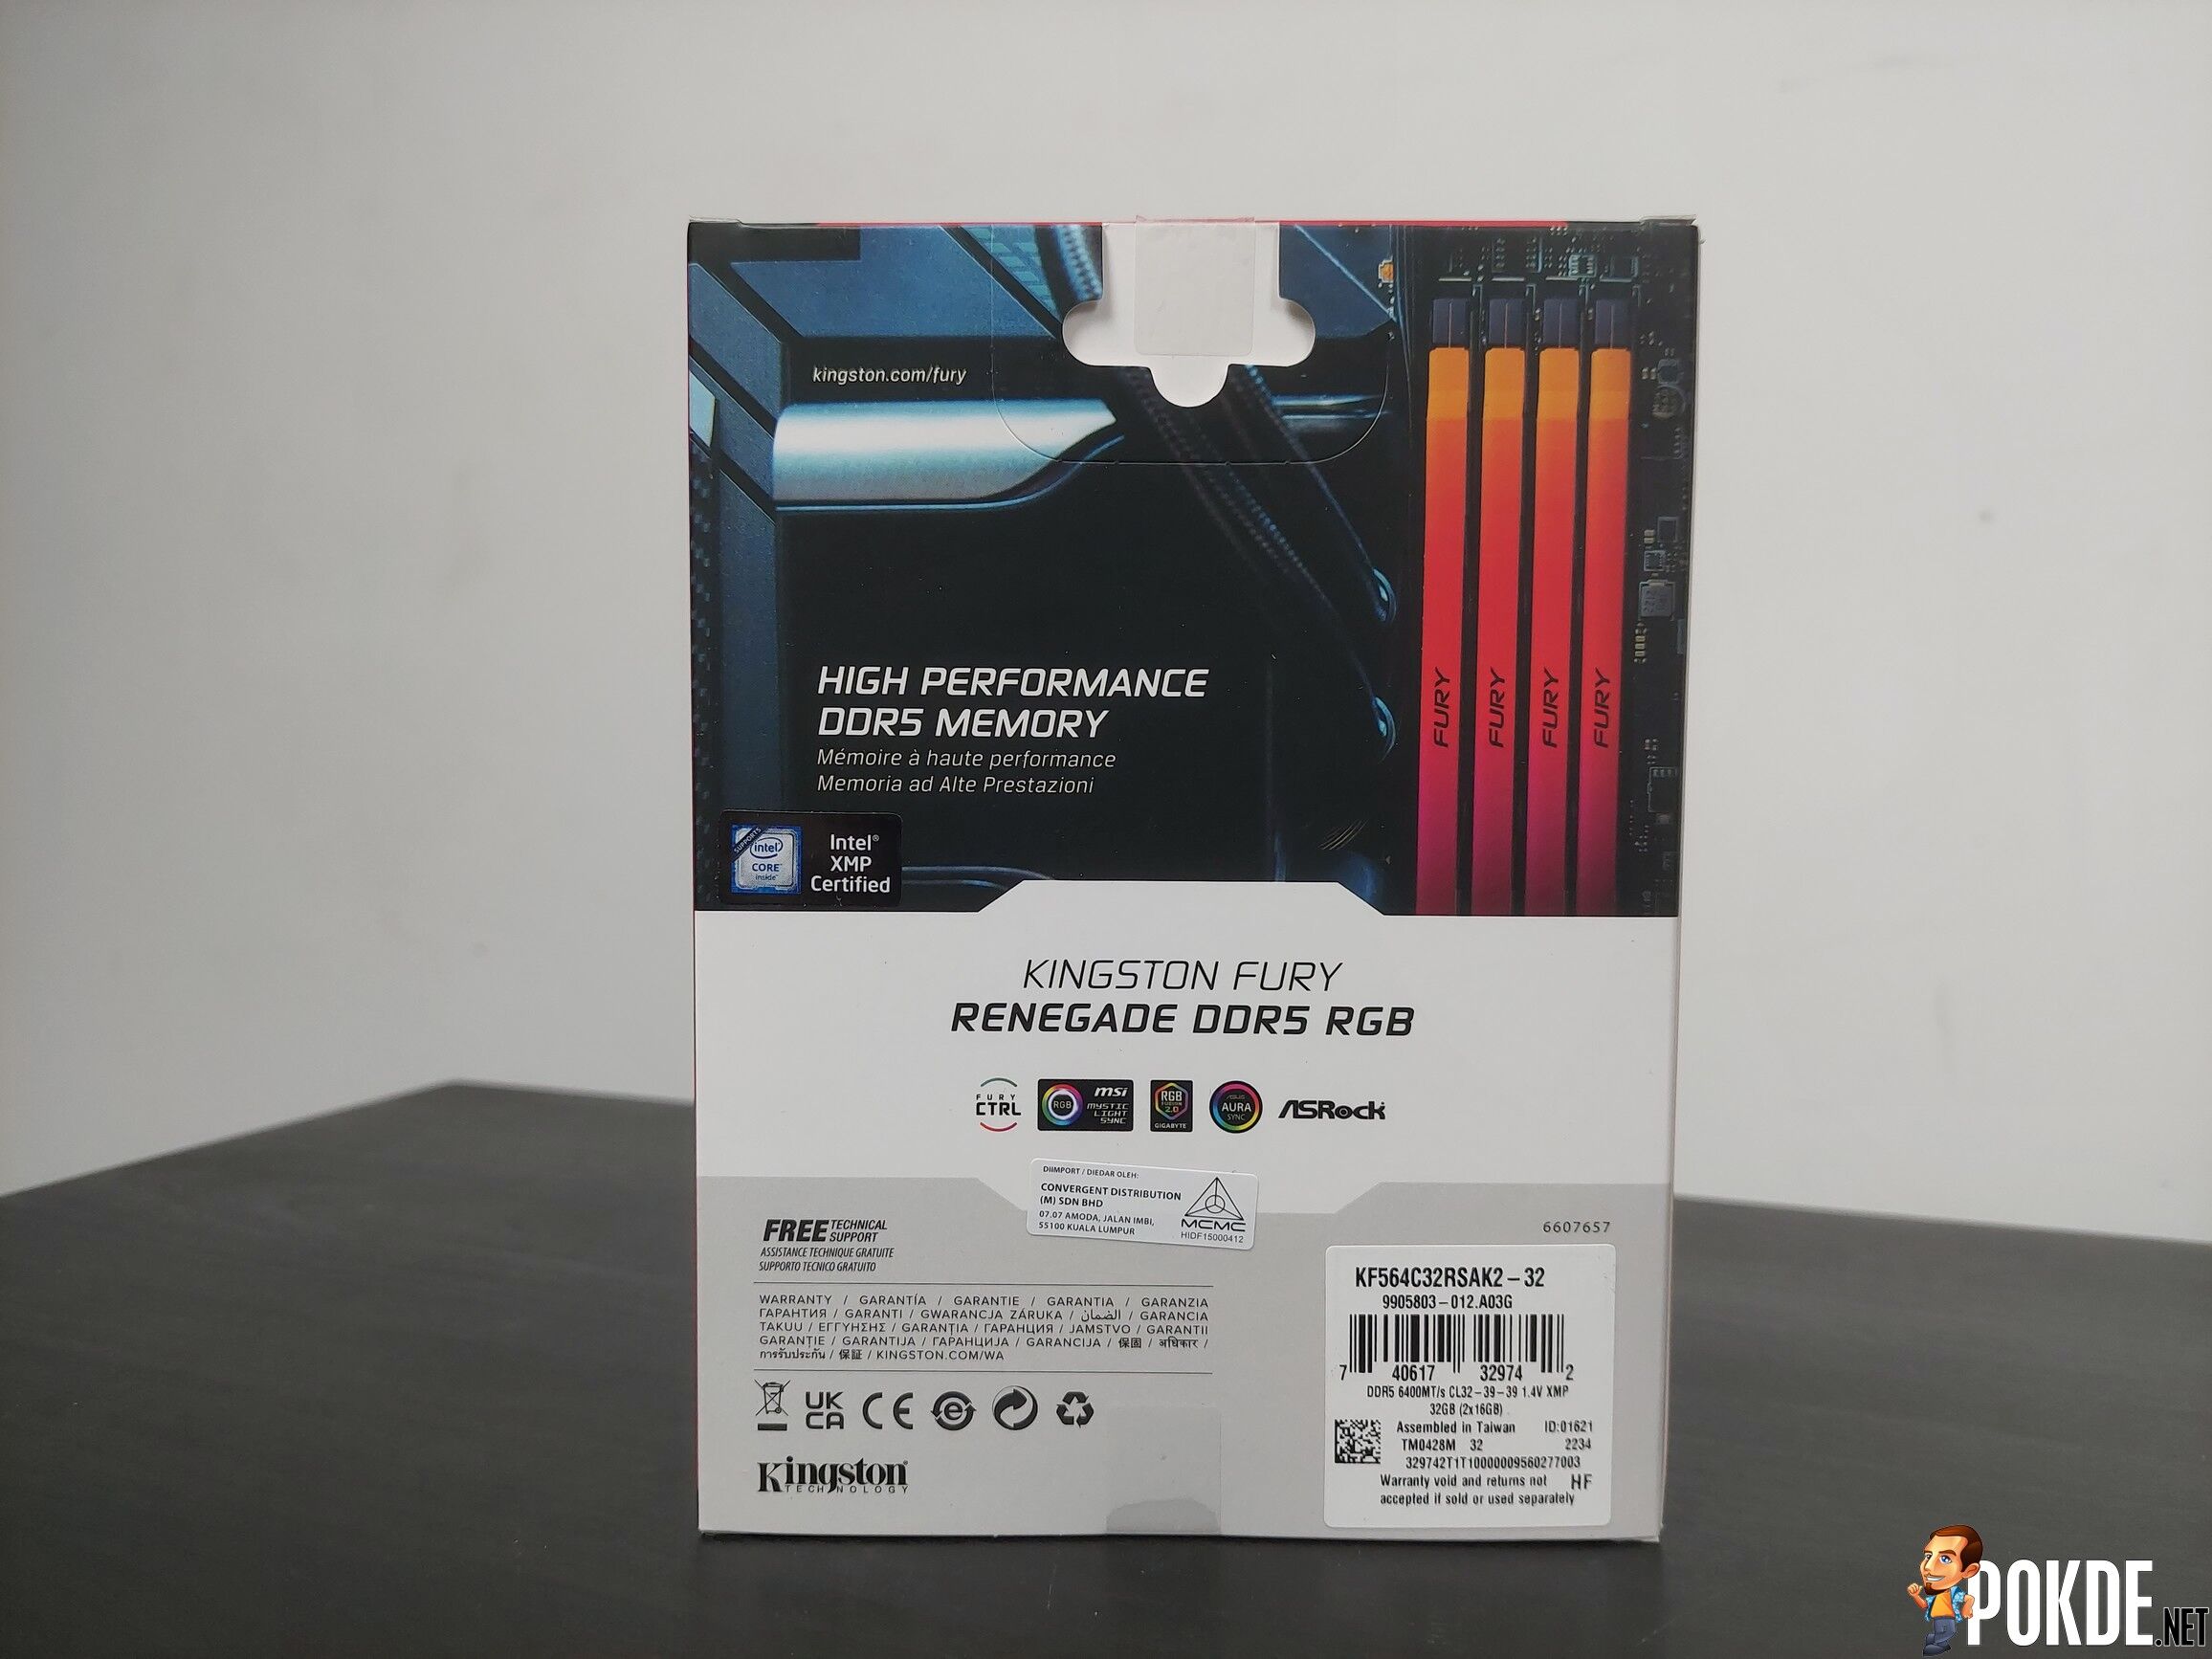 Kingston FURY RENEGADE DDR5 RGB (DDR5-6400 CL32) Review - To RGB Or Not To RGB? 29